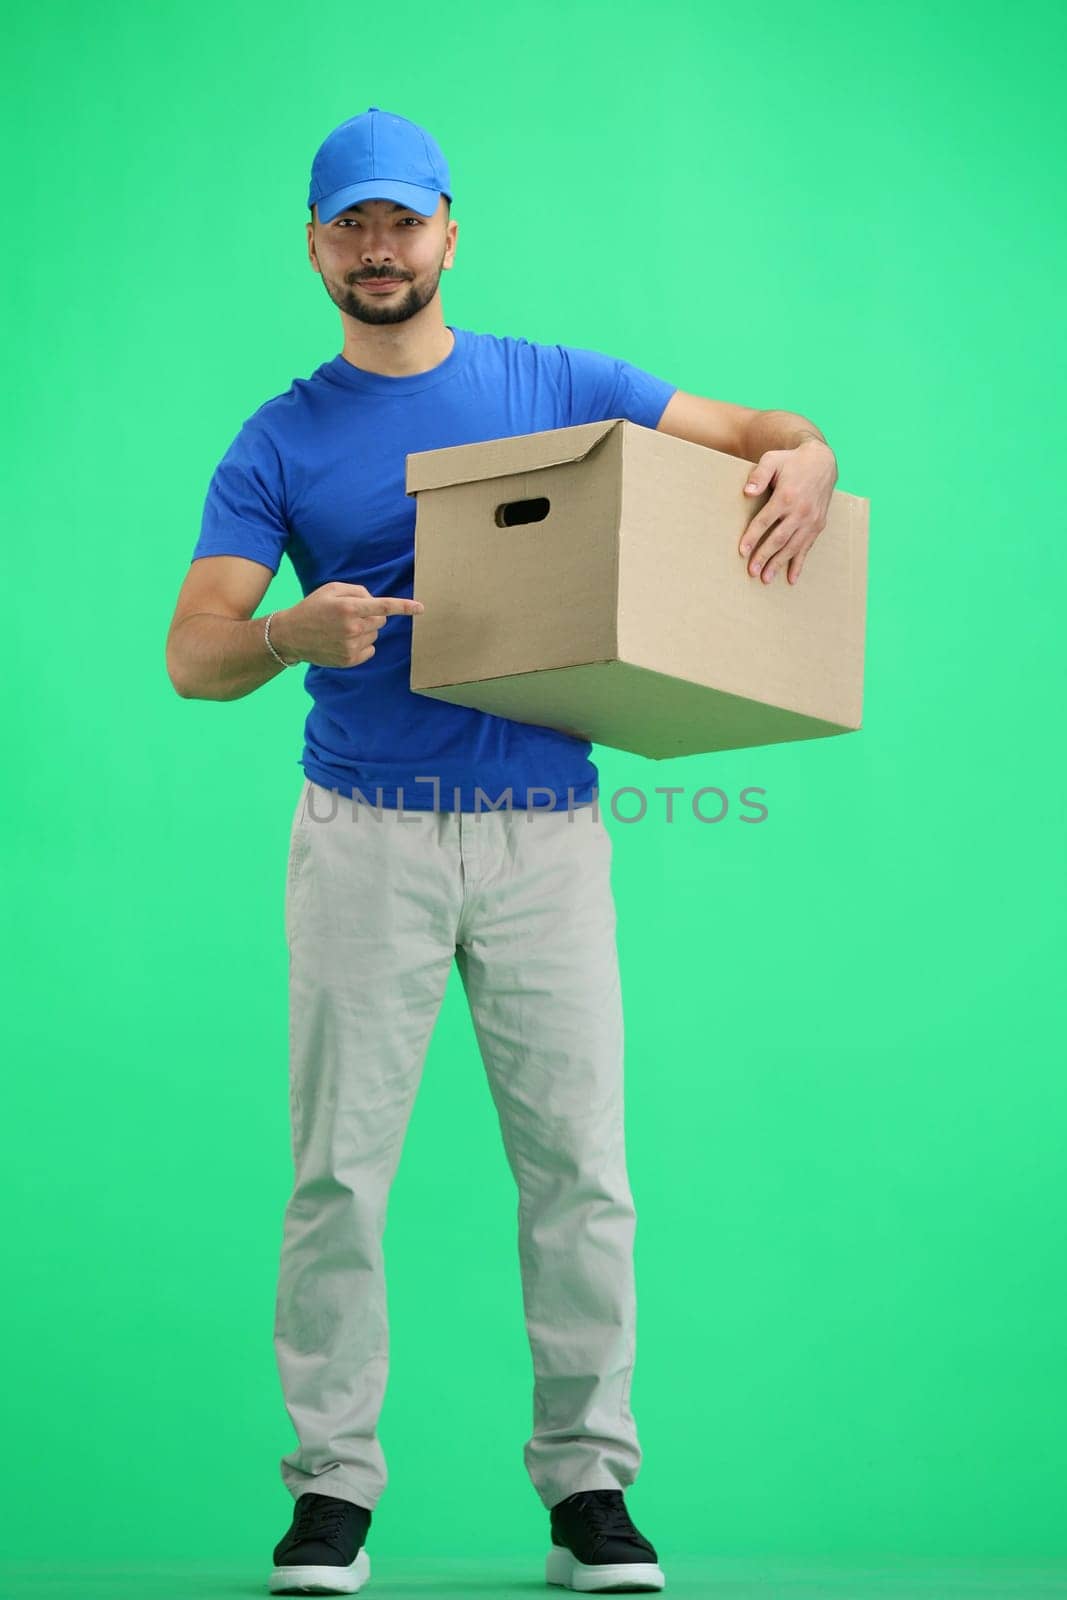 The deliveryman, in full height, on a green background, points to the box.